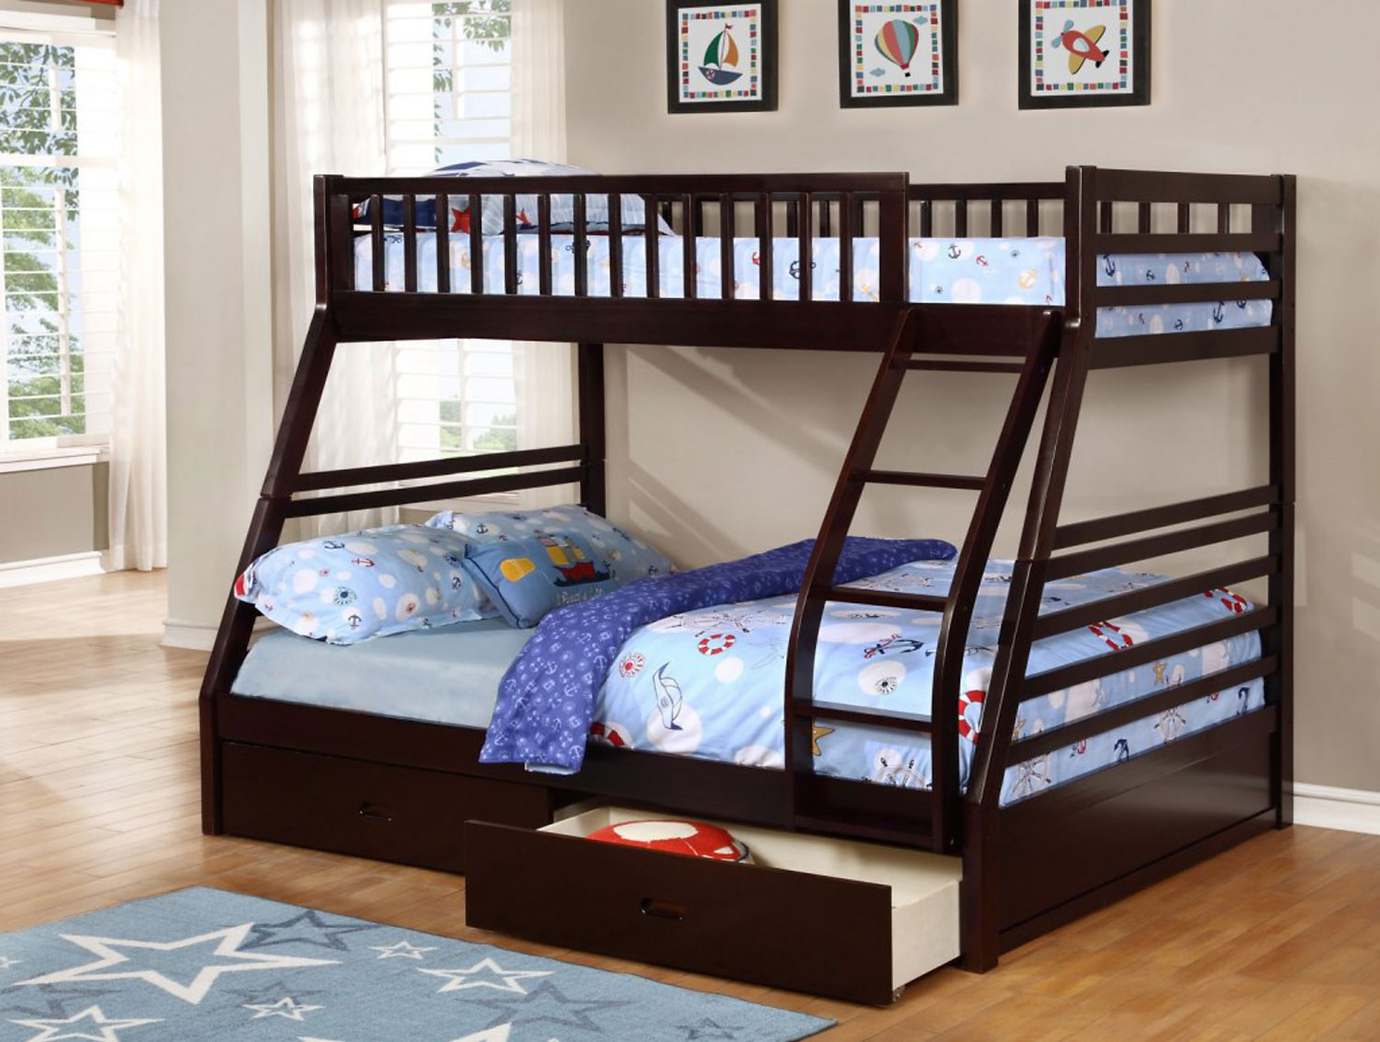 Single over Double Bunk Bed